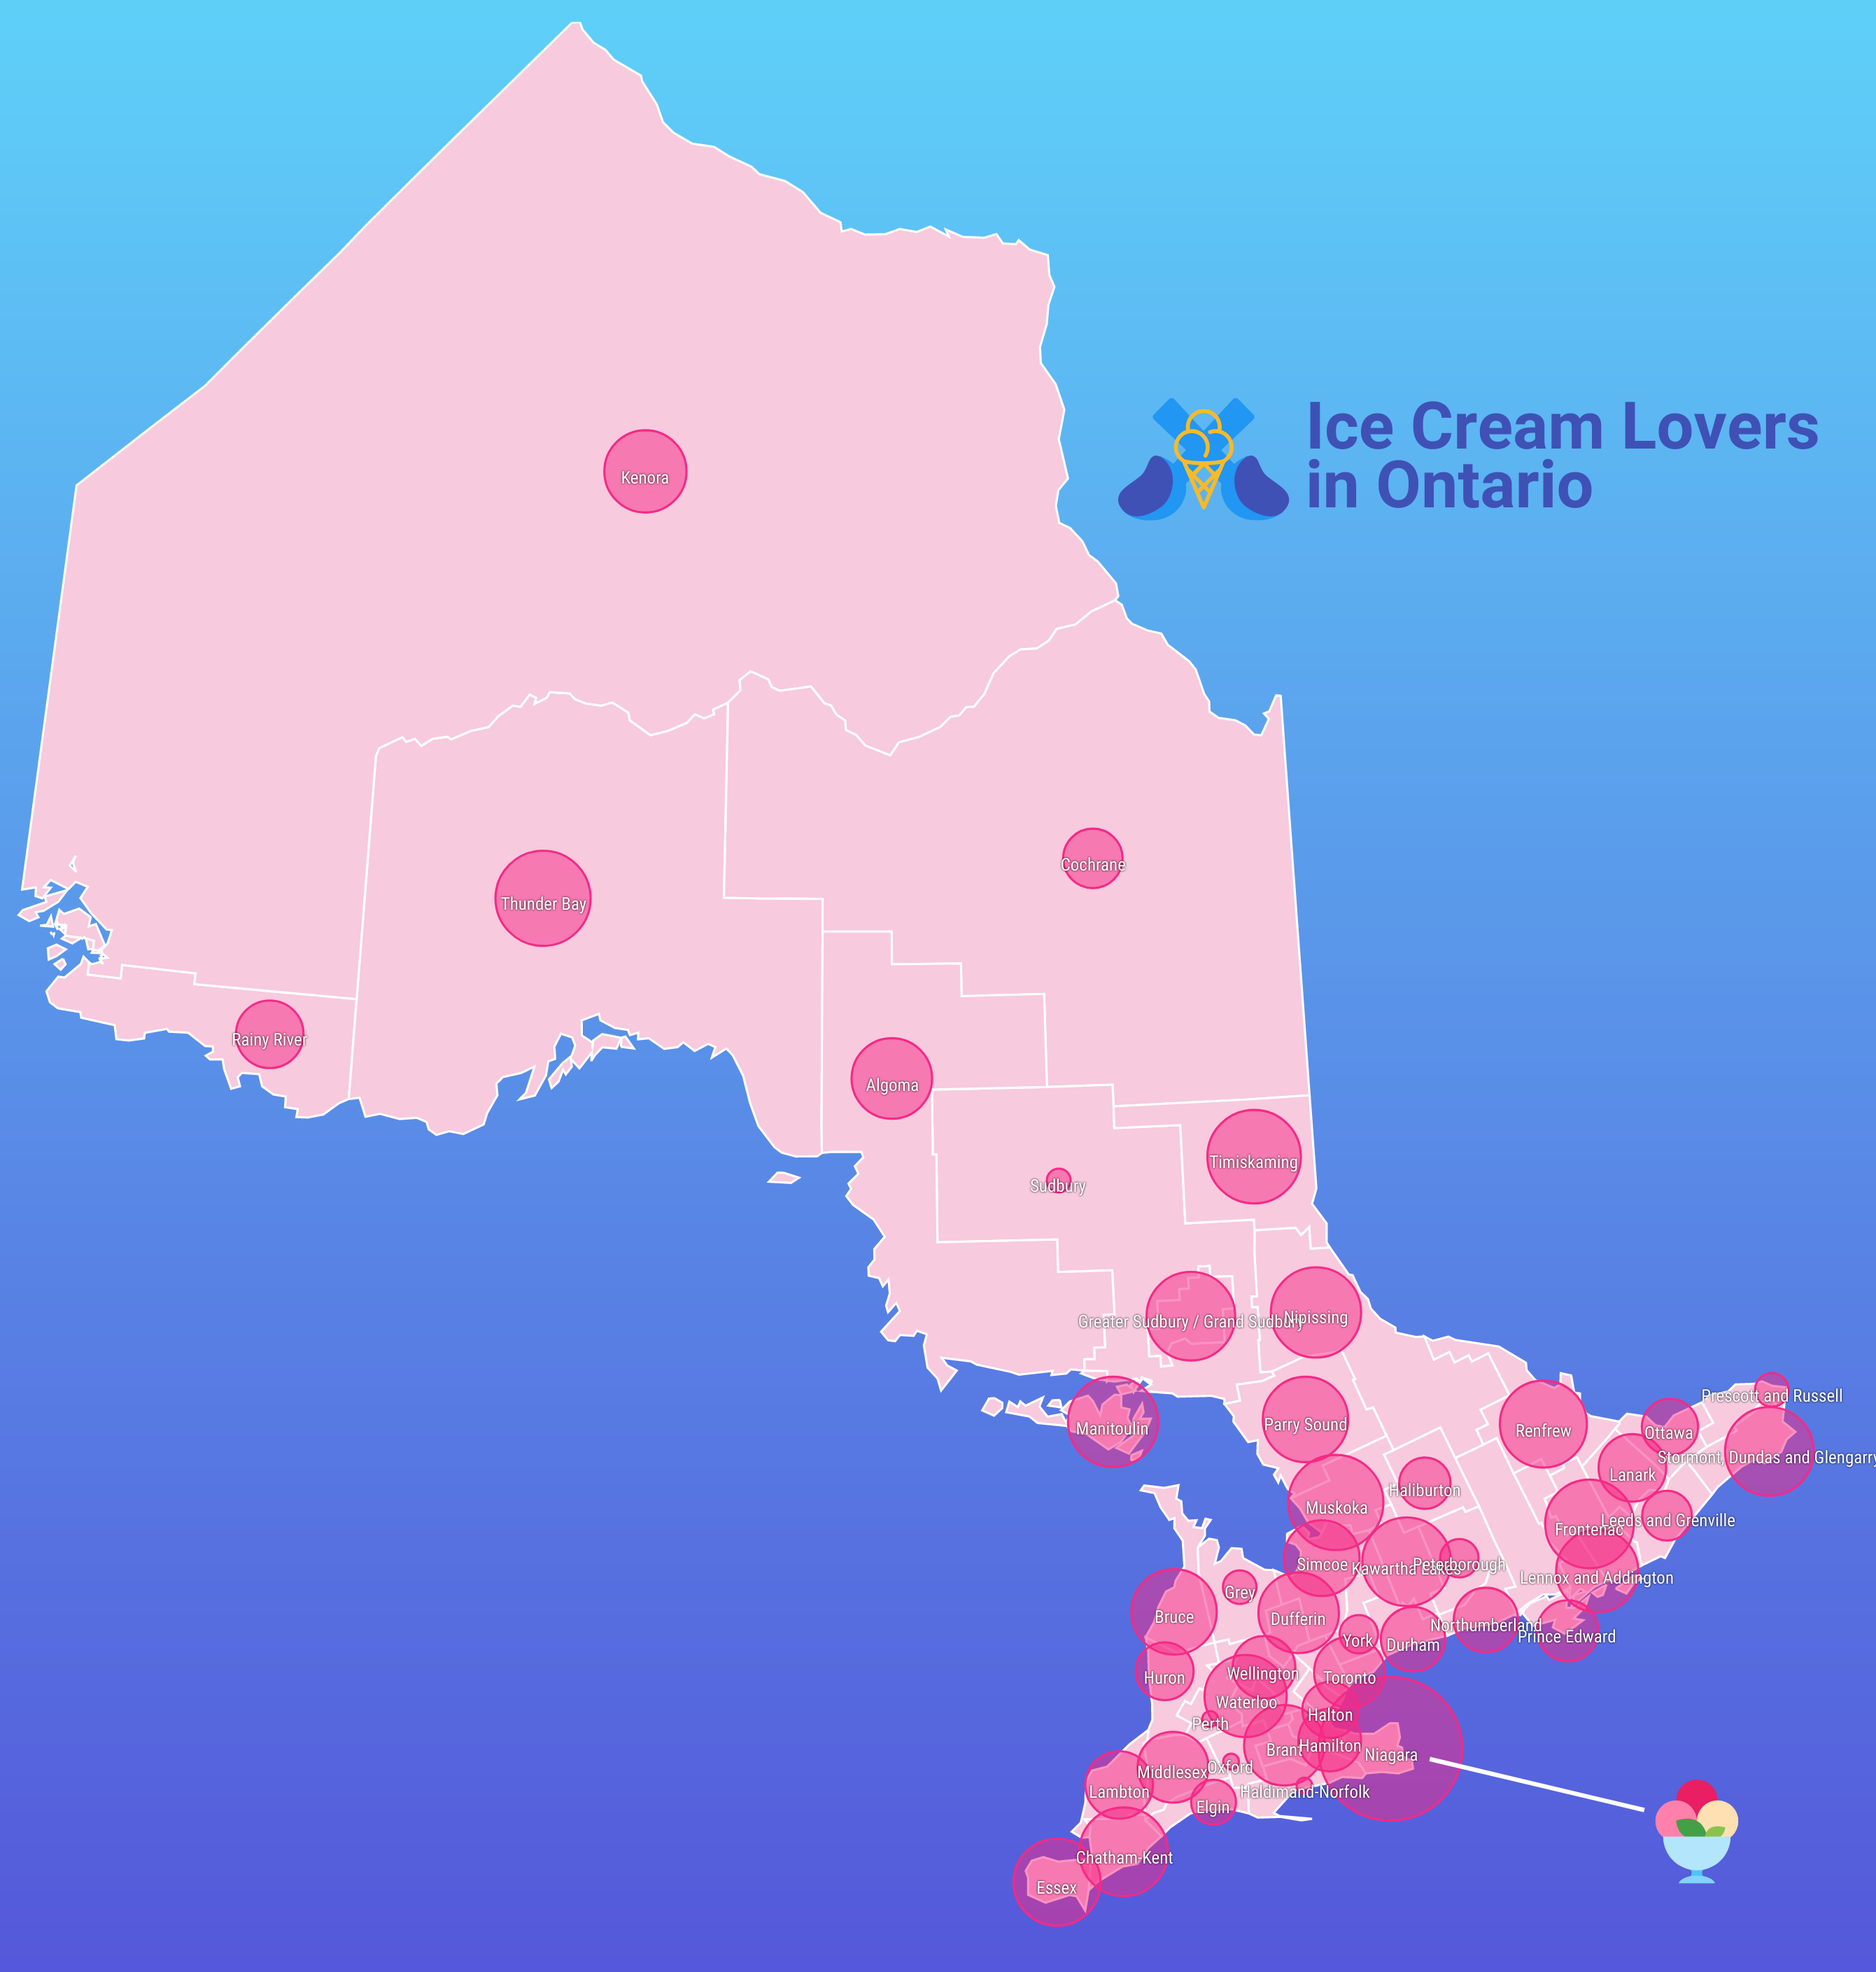 A bubble map of Ontario titled 'Ice Cream Lovers in Ontario'. The names of the regions appear over each one in white text outlined in black. There is a white line indicating the region covered by the largest bubble (Niagara), with an ice cream sundae icon next to it. The province is light pink and regions are overlayed with dark pink bubbles of varying sizes. The background is a light to dark blue gradient.